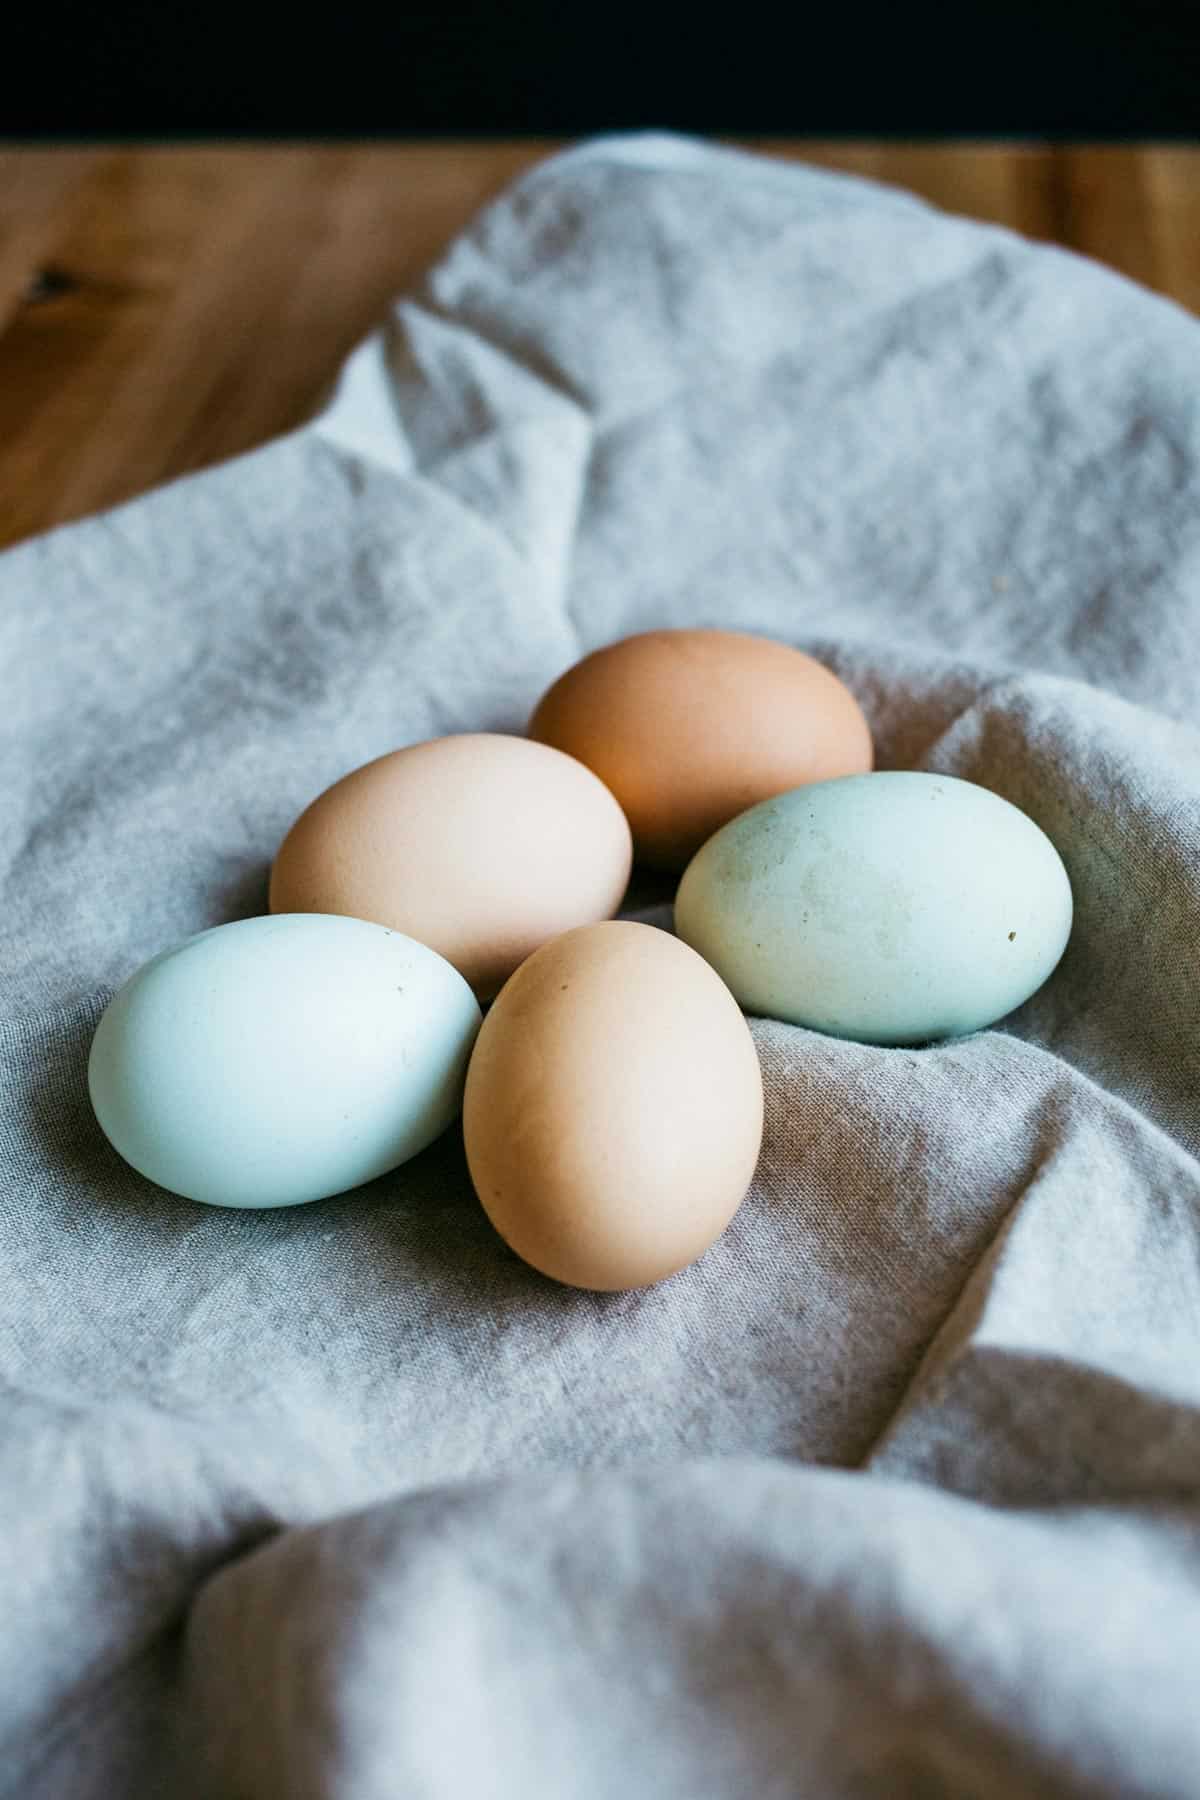 Different colored eggs on a gray linen towel.